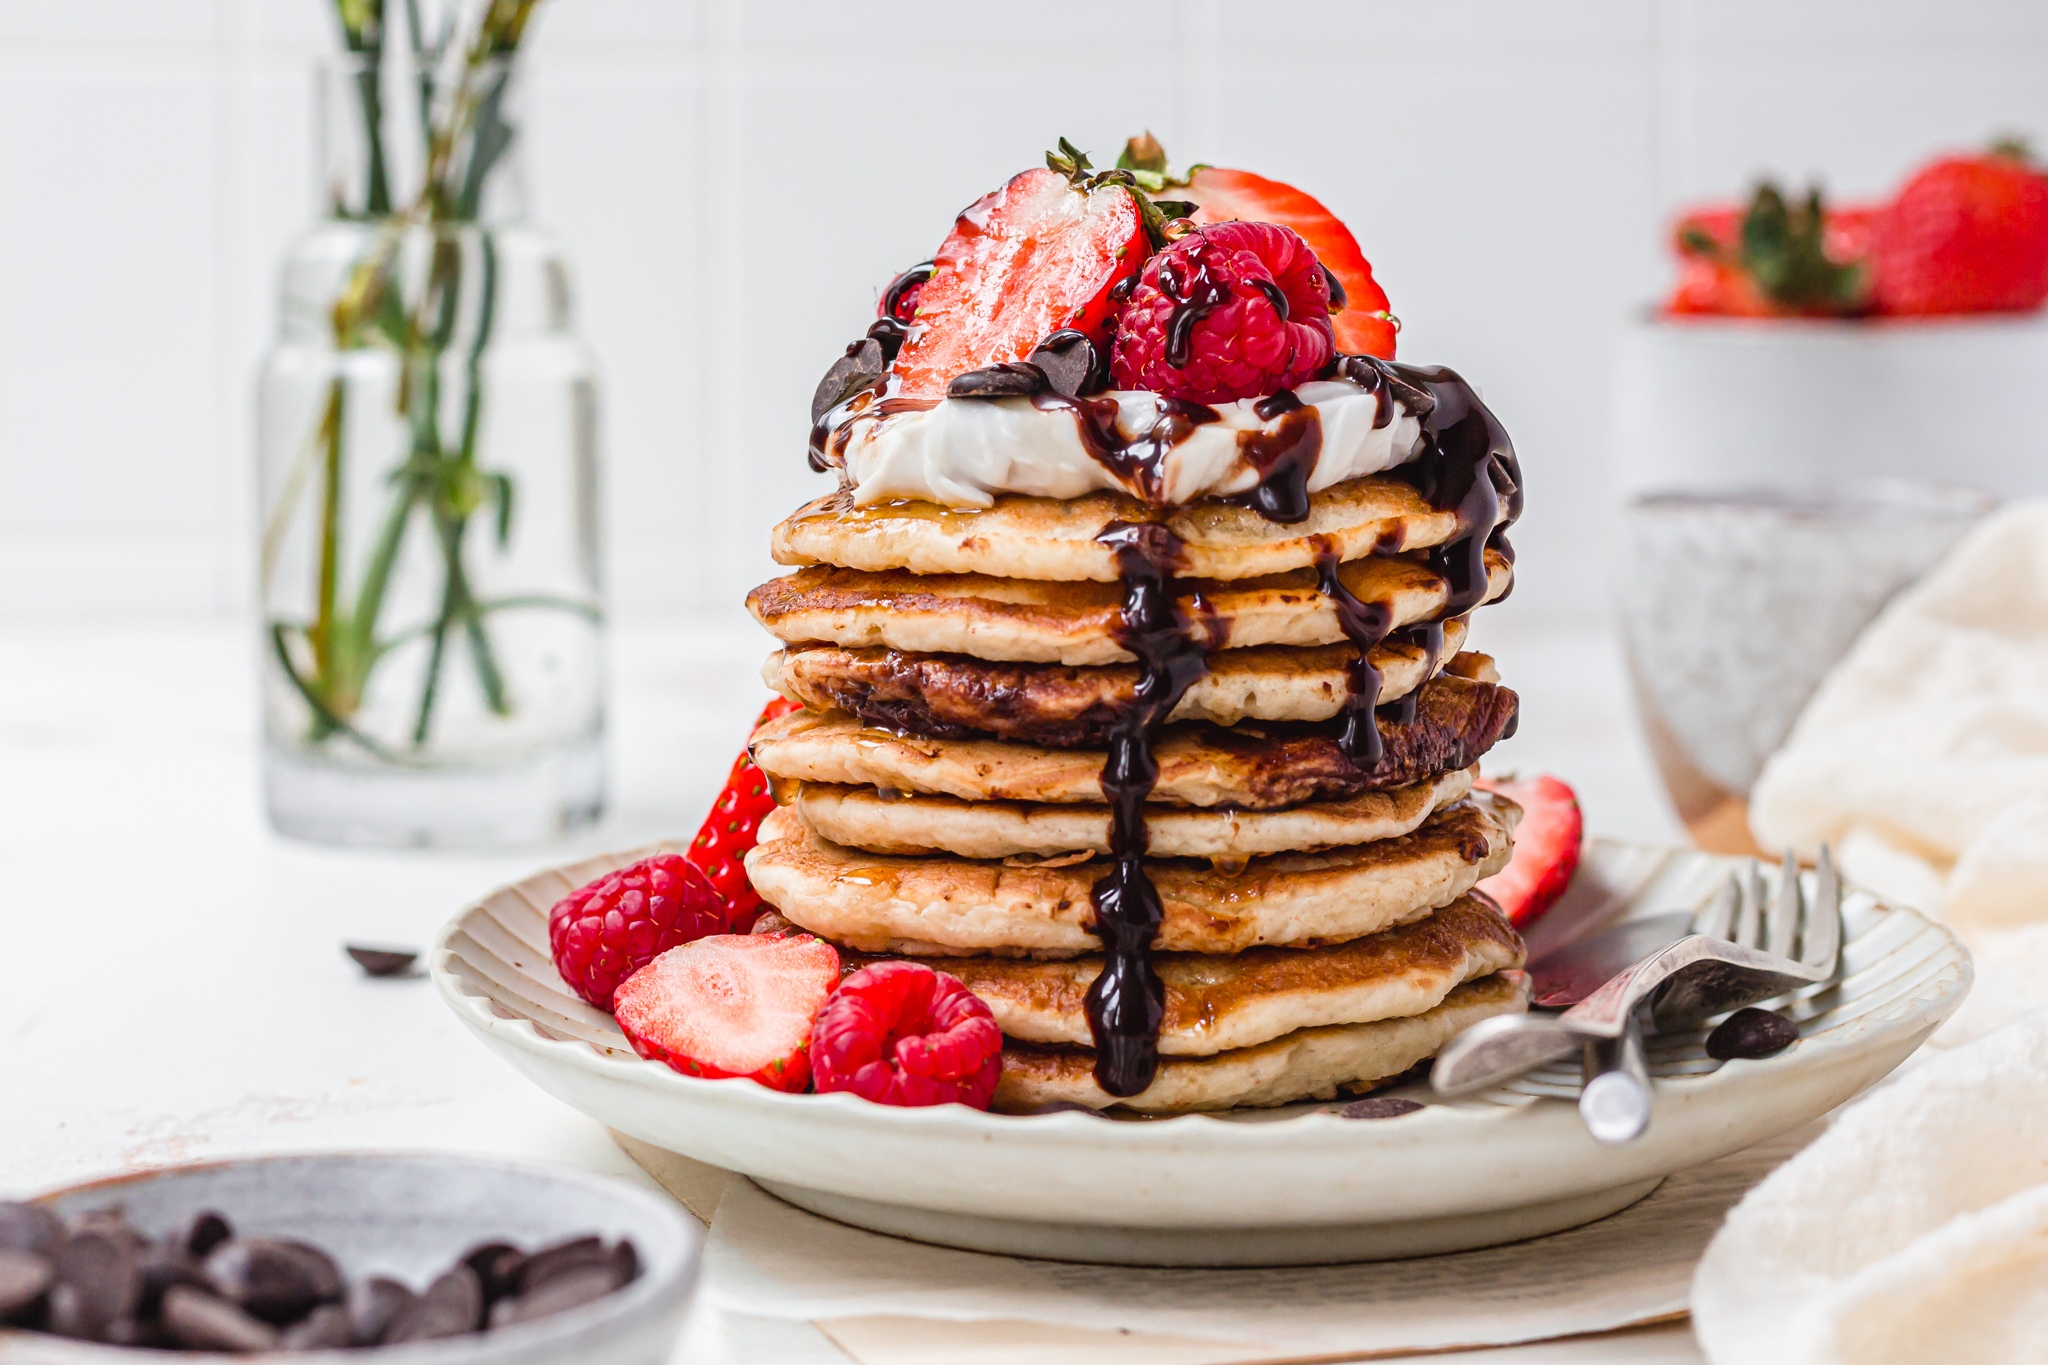 Landscape image of Chocolate Filled Pancakes